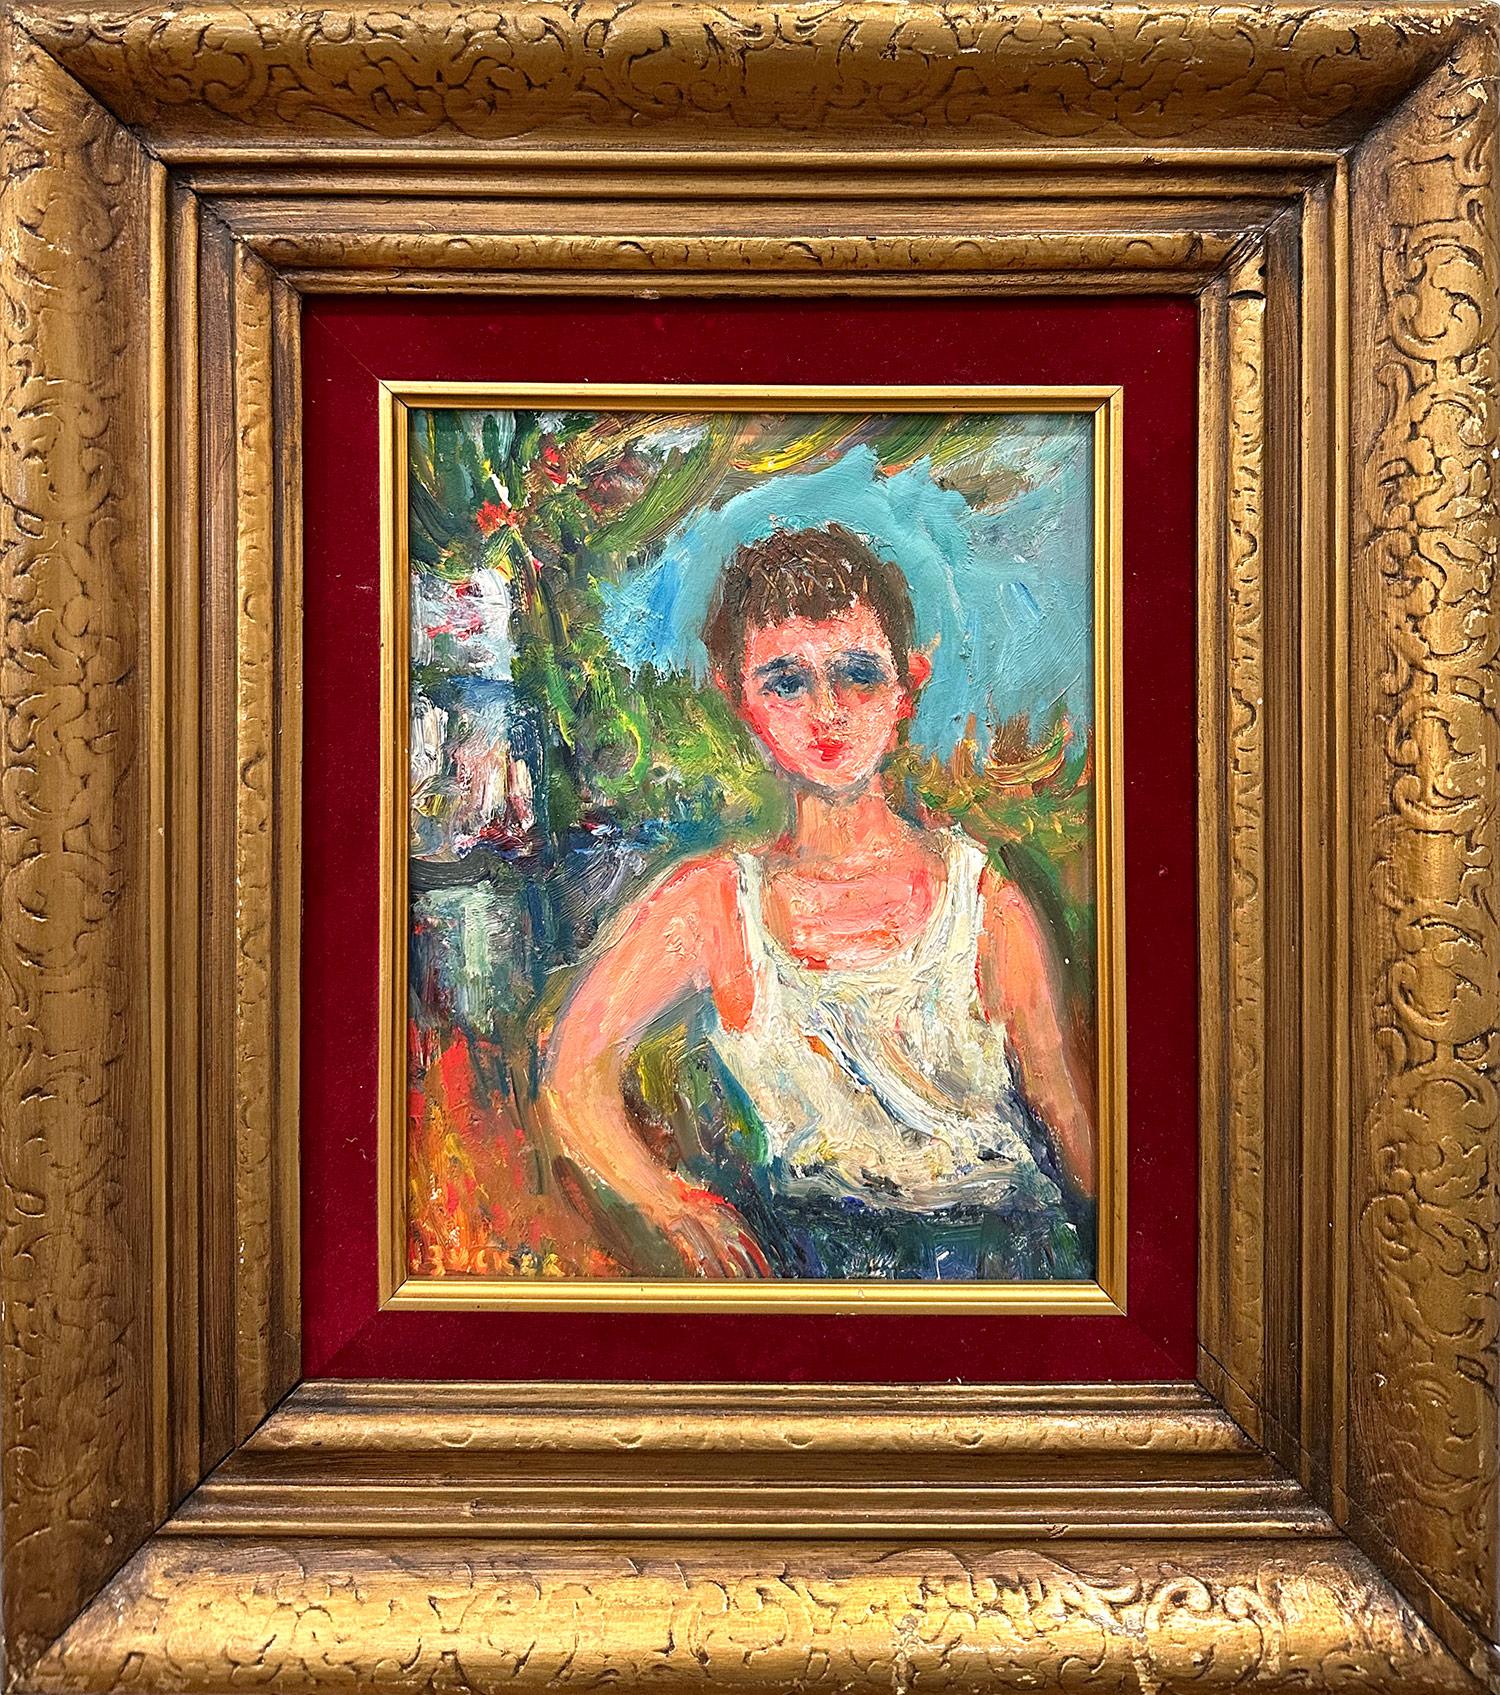 Jacques Zucker Portrait Painting - "Portrait of Young Boy" Post-Impressionism French Oil Painting on Panel Framed